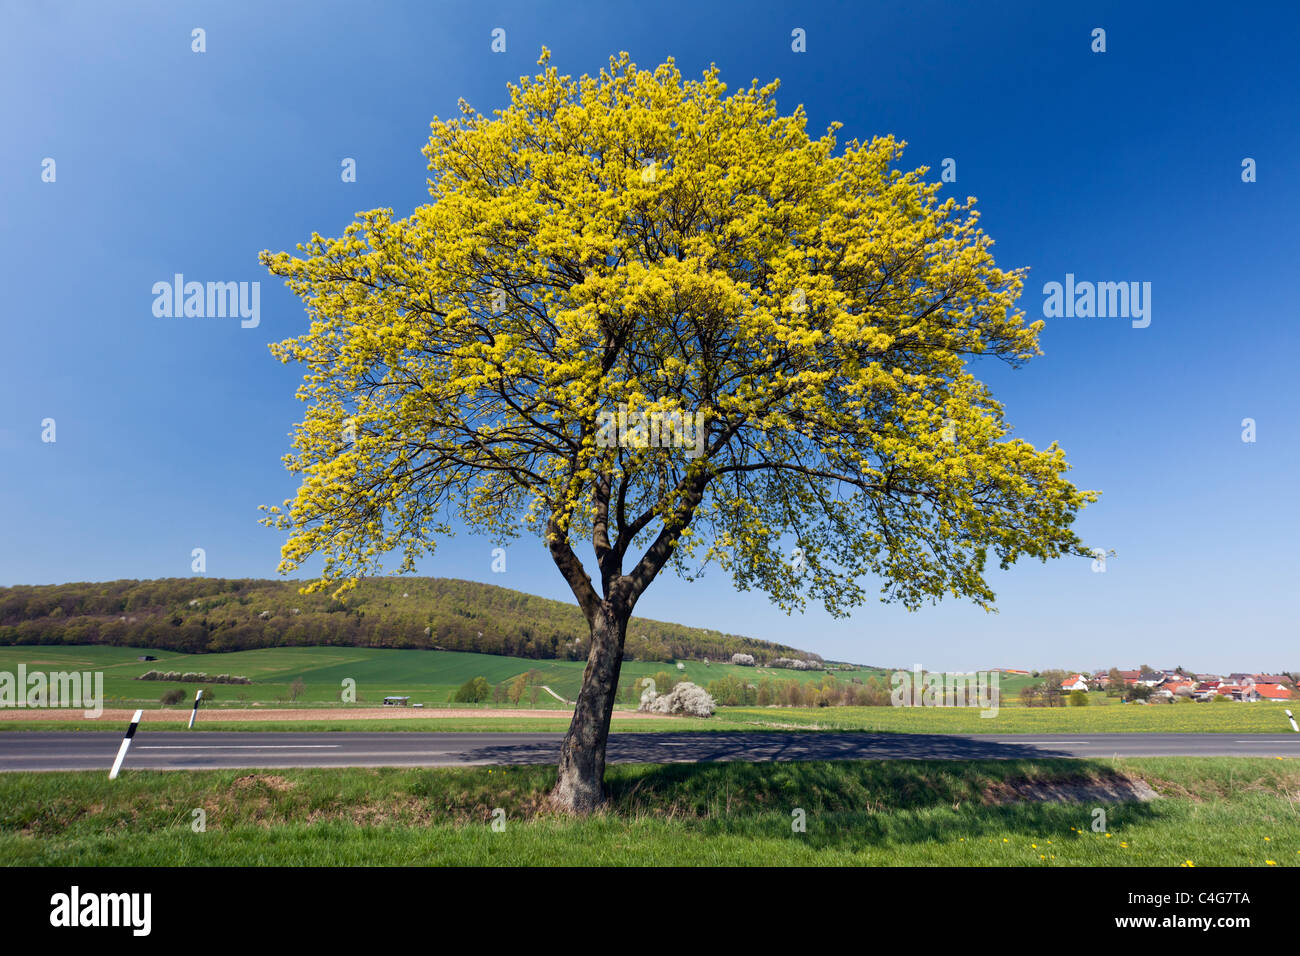 Norway Maple (Acer platanoides), tree flowering in Spring, Lower Saxony, Germany Stock Photo